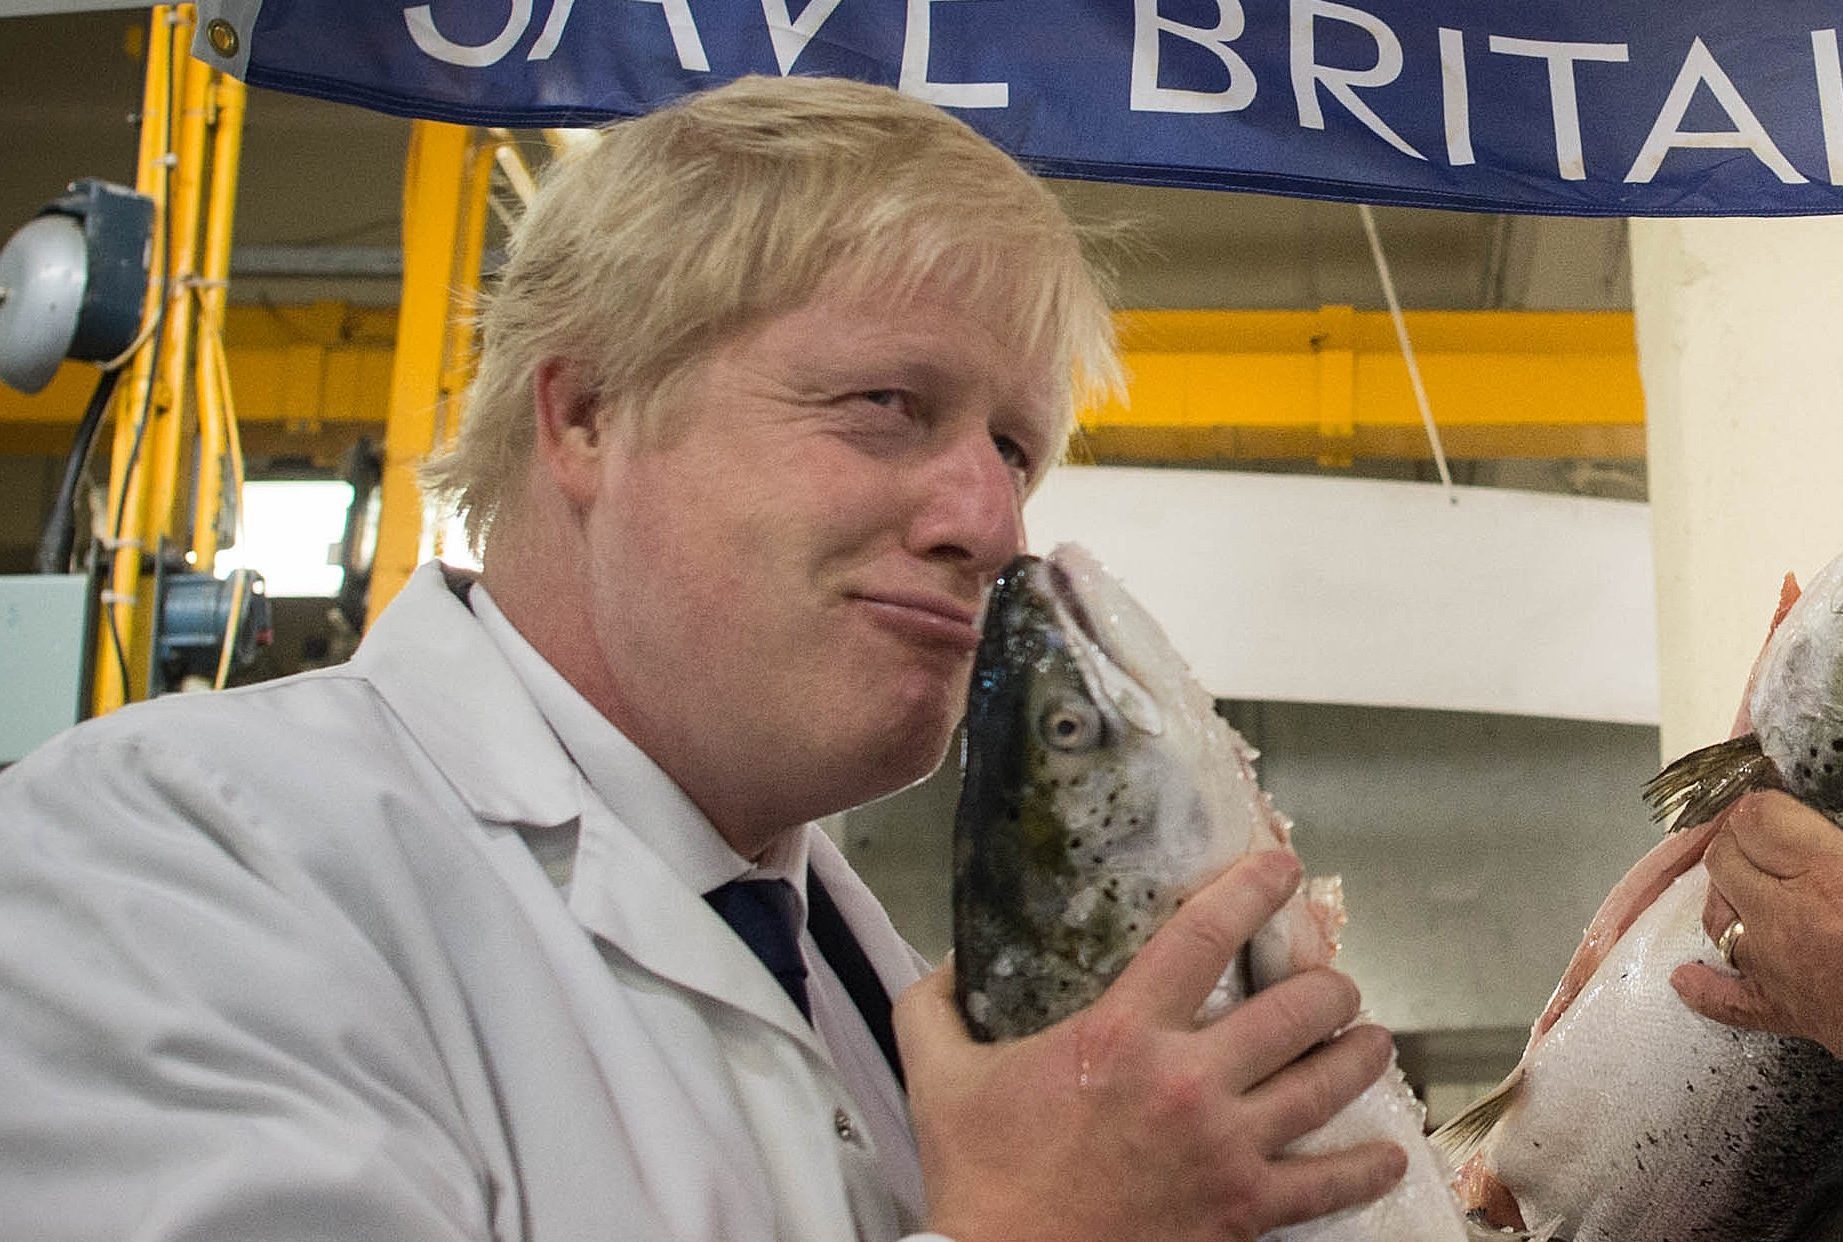 Boris Johnson (left) kisses a wild salmon as he is shown around Billingsgate Fish Market in London with porter Greg Essex on Wednesday morning